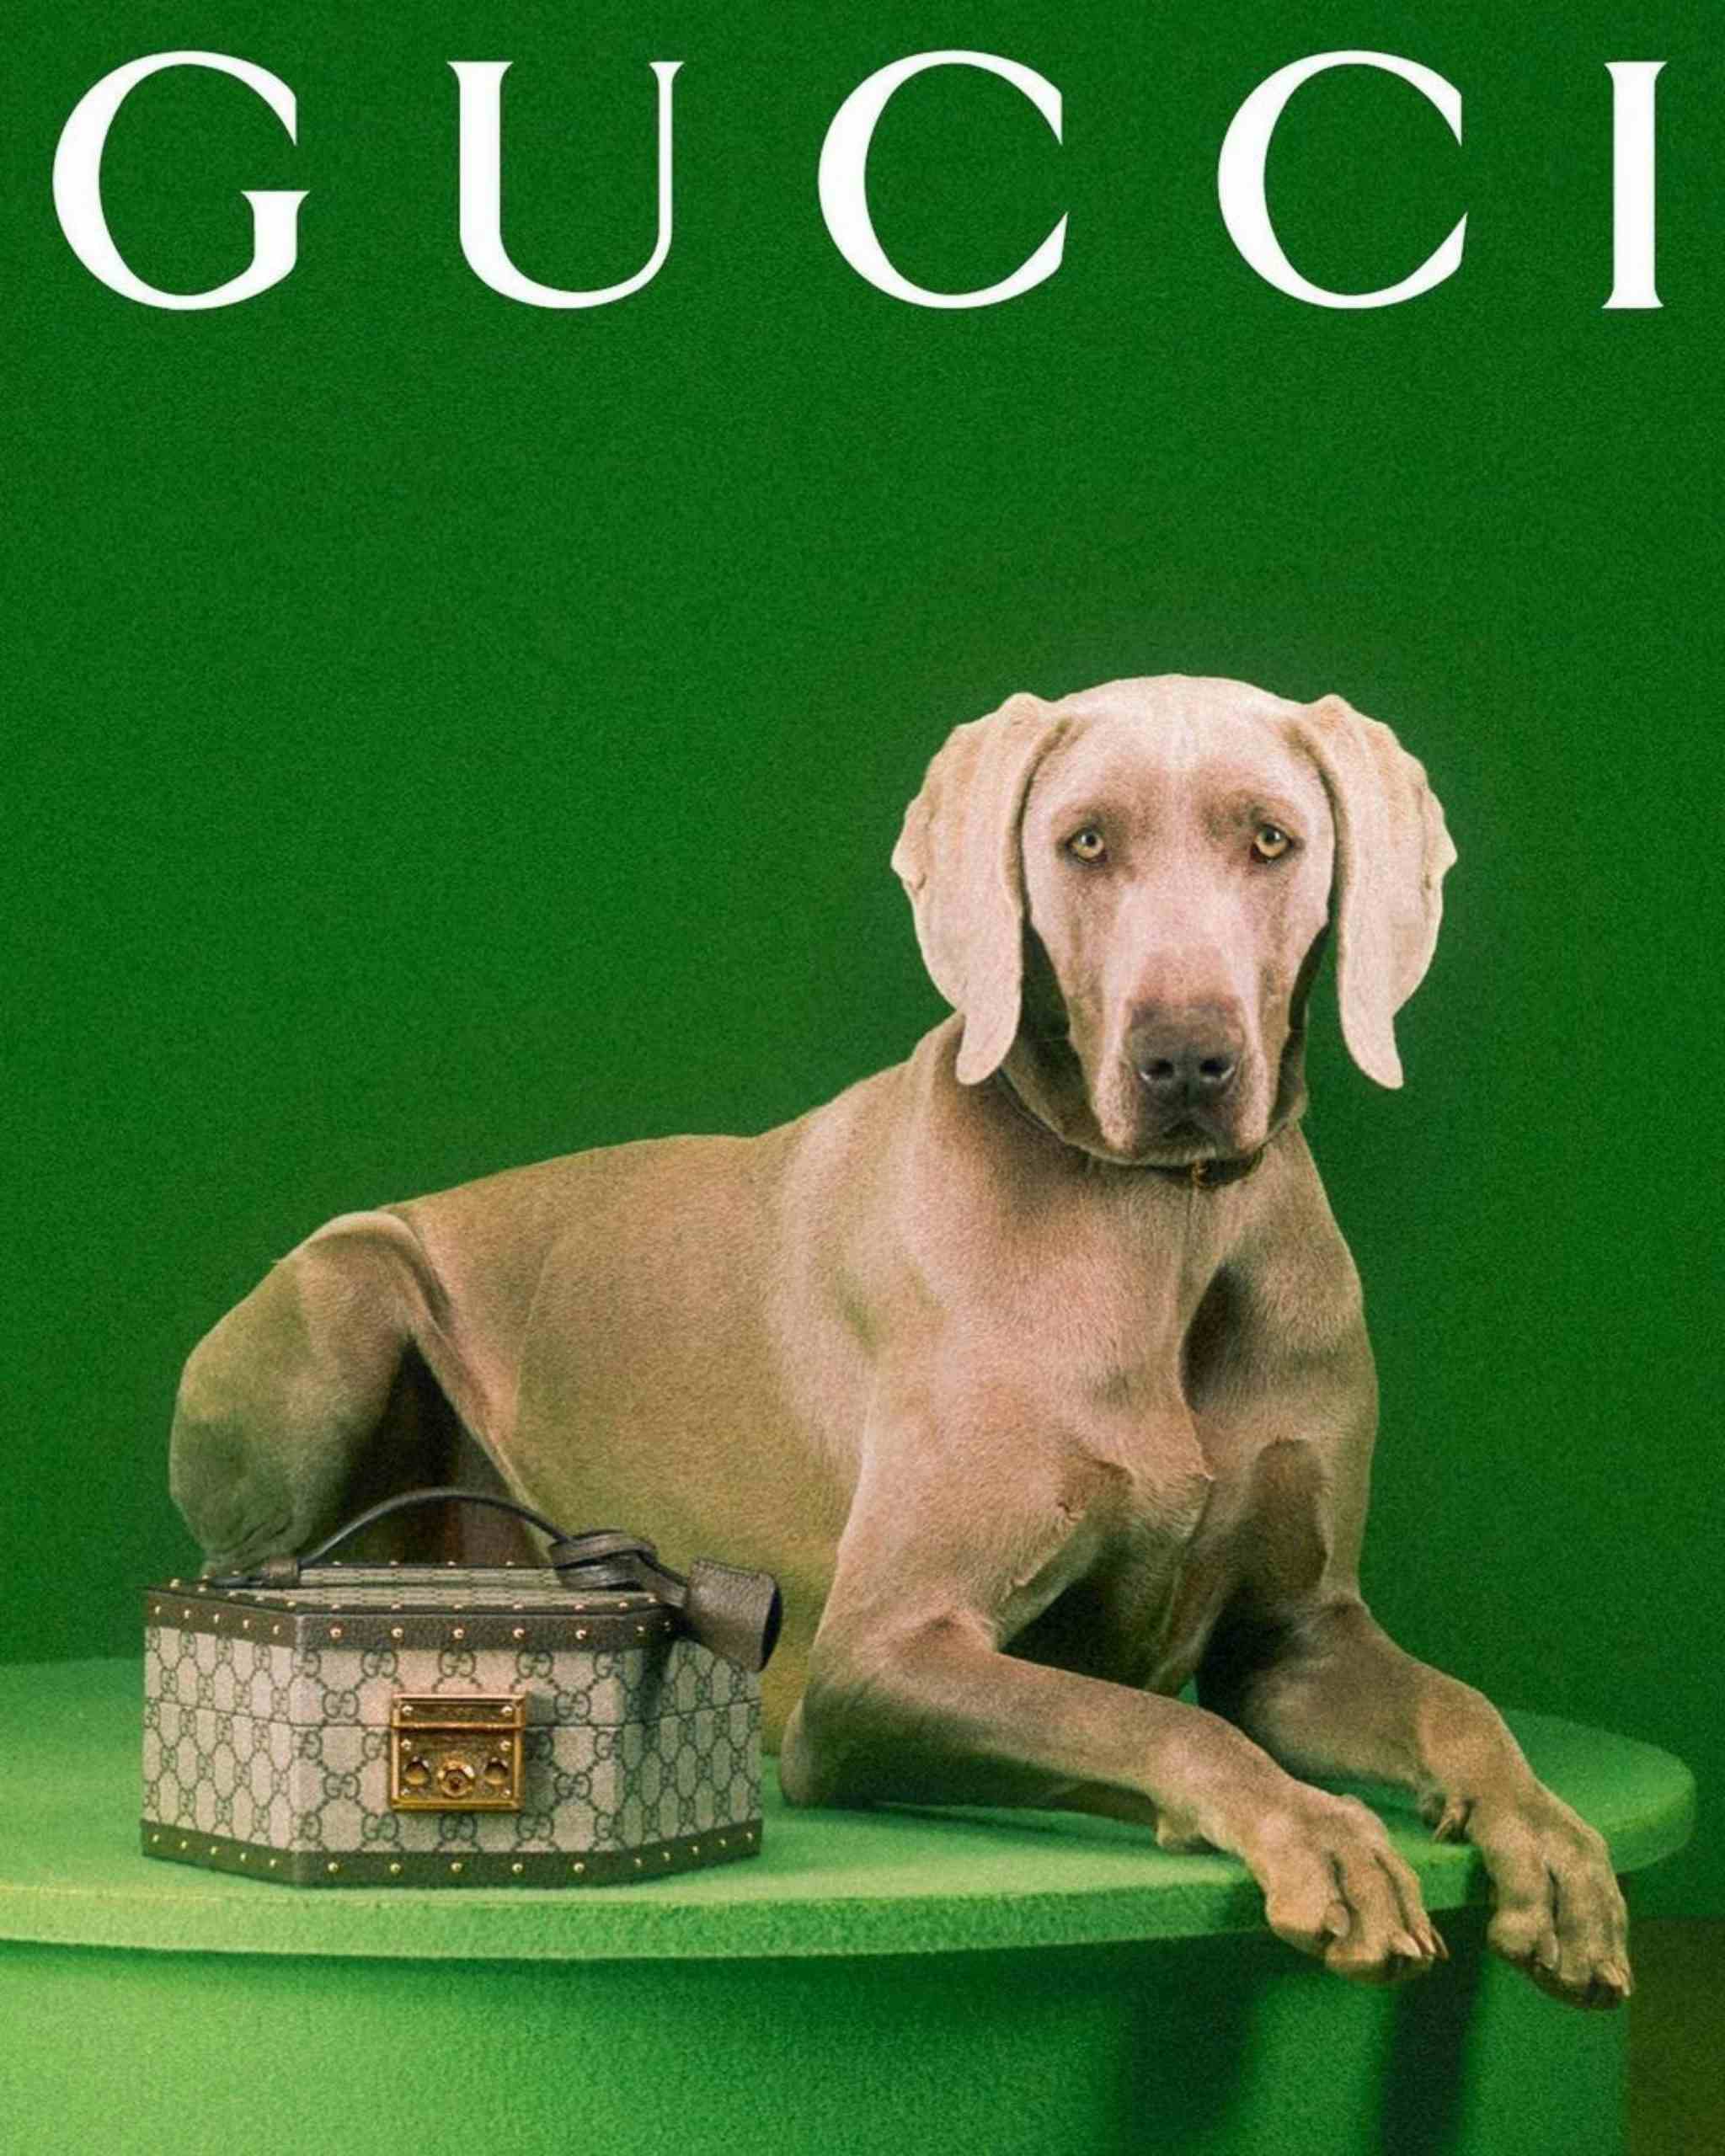 GUCCI -  Gucci Pet Collection
Photographer: Max Siedentopf
